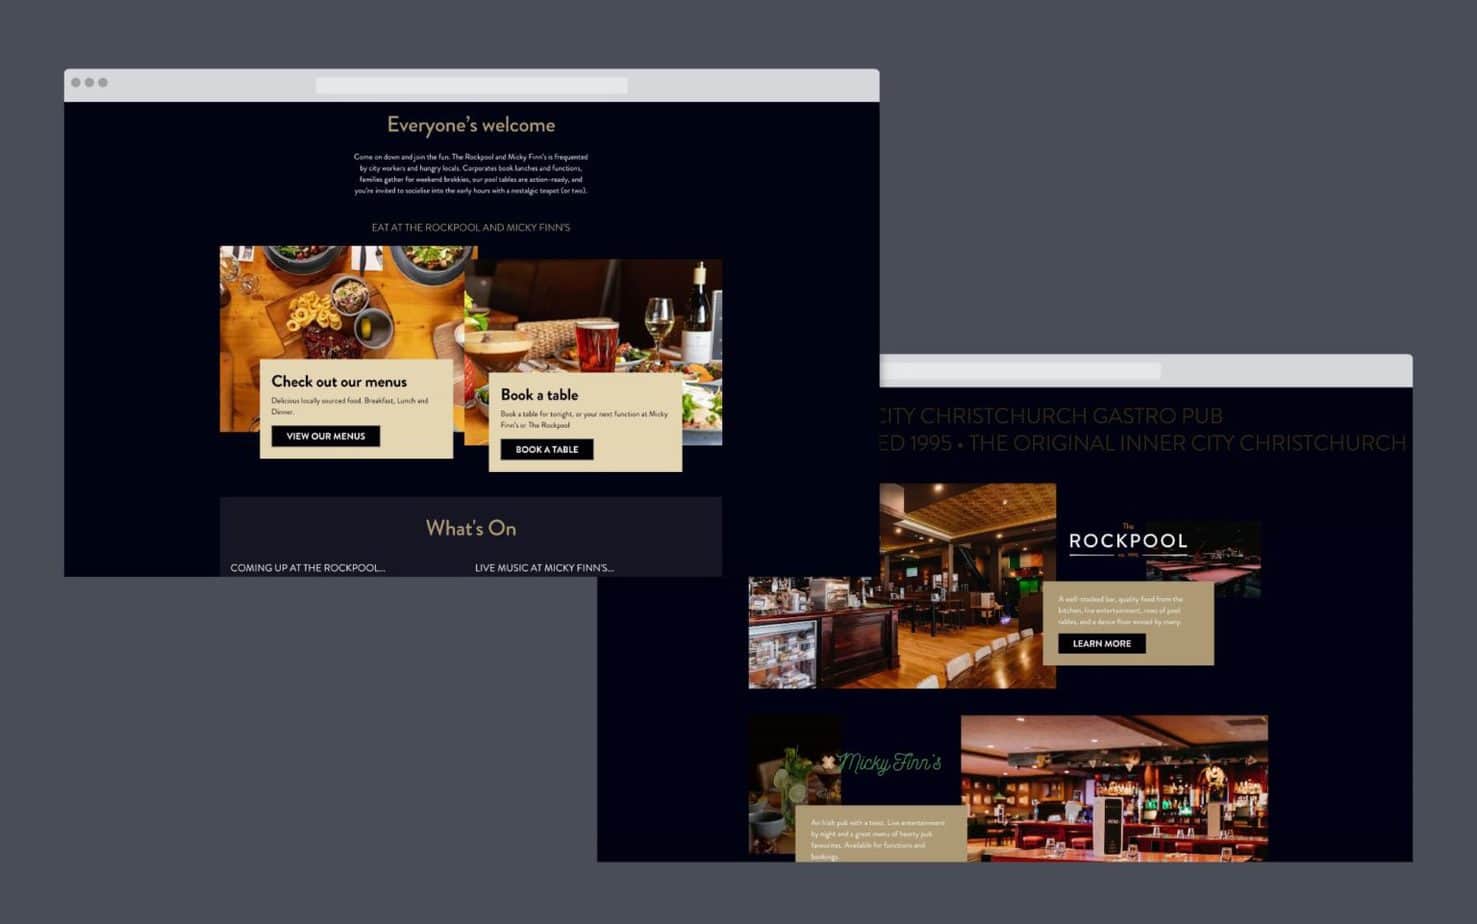 Rockpool Restaurant Bookings Website inside pages